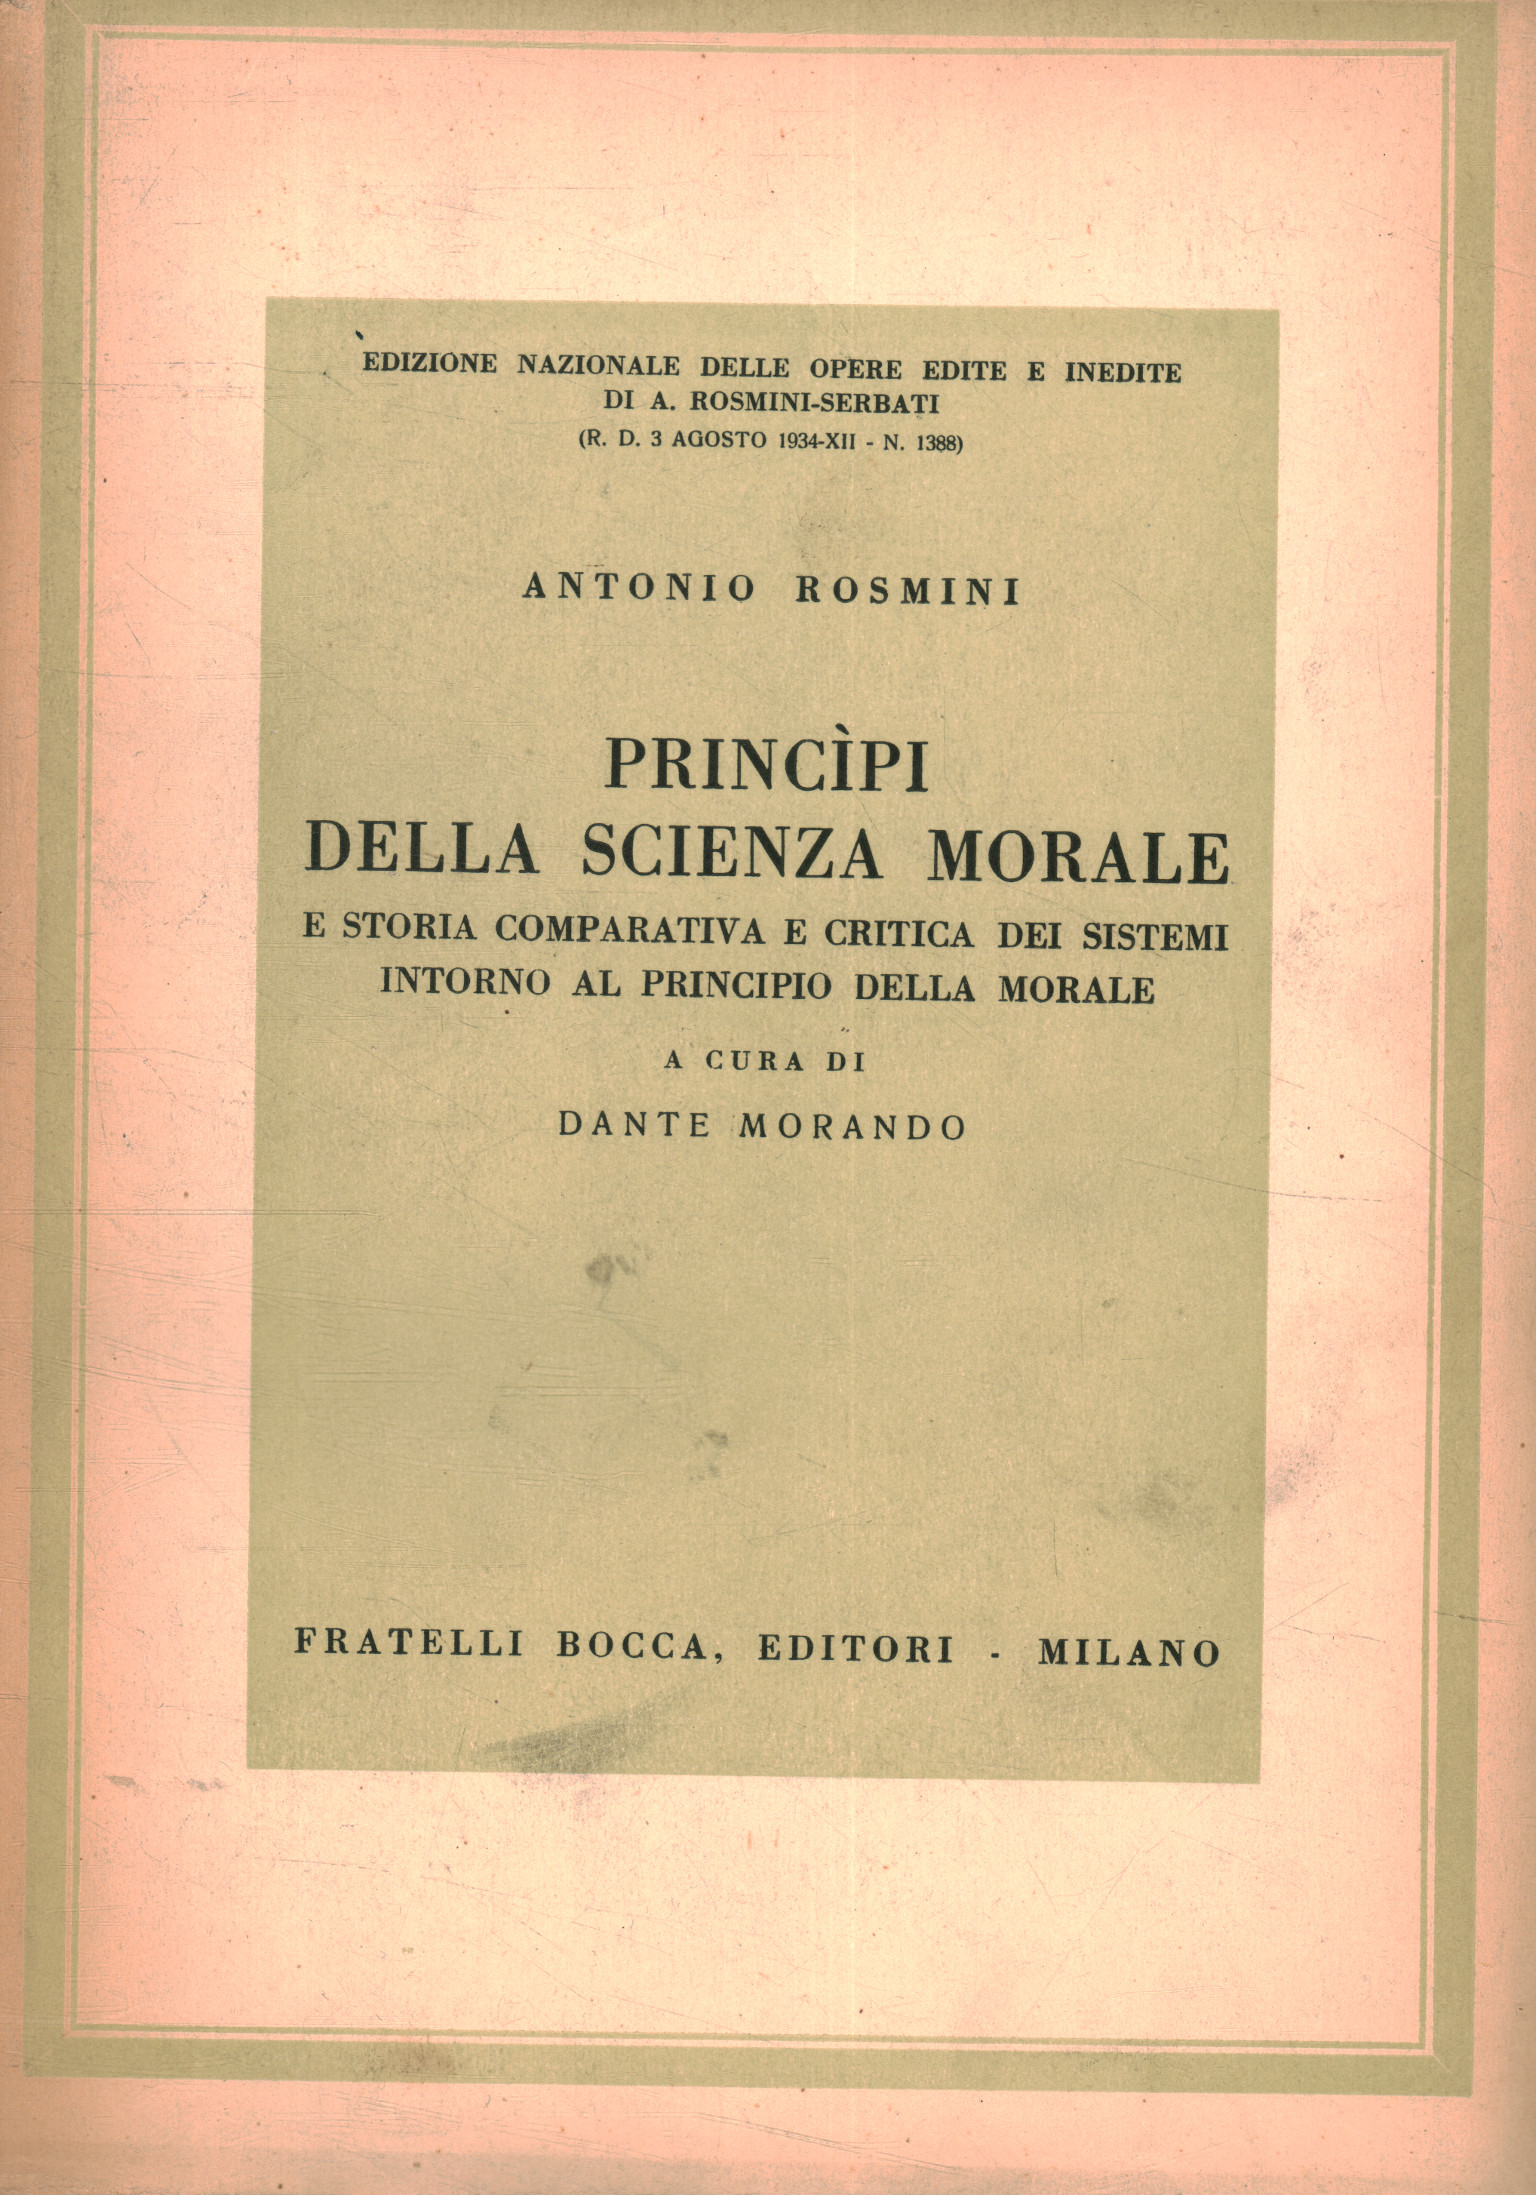 Principles of Moral Science, s.a.